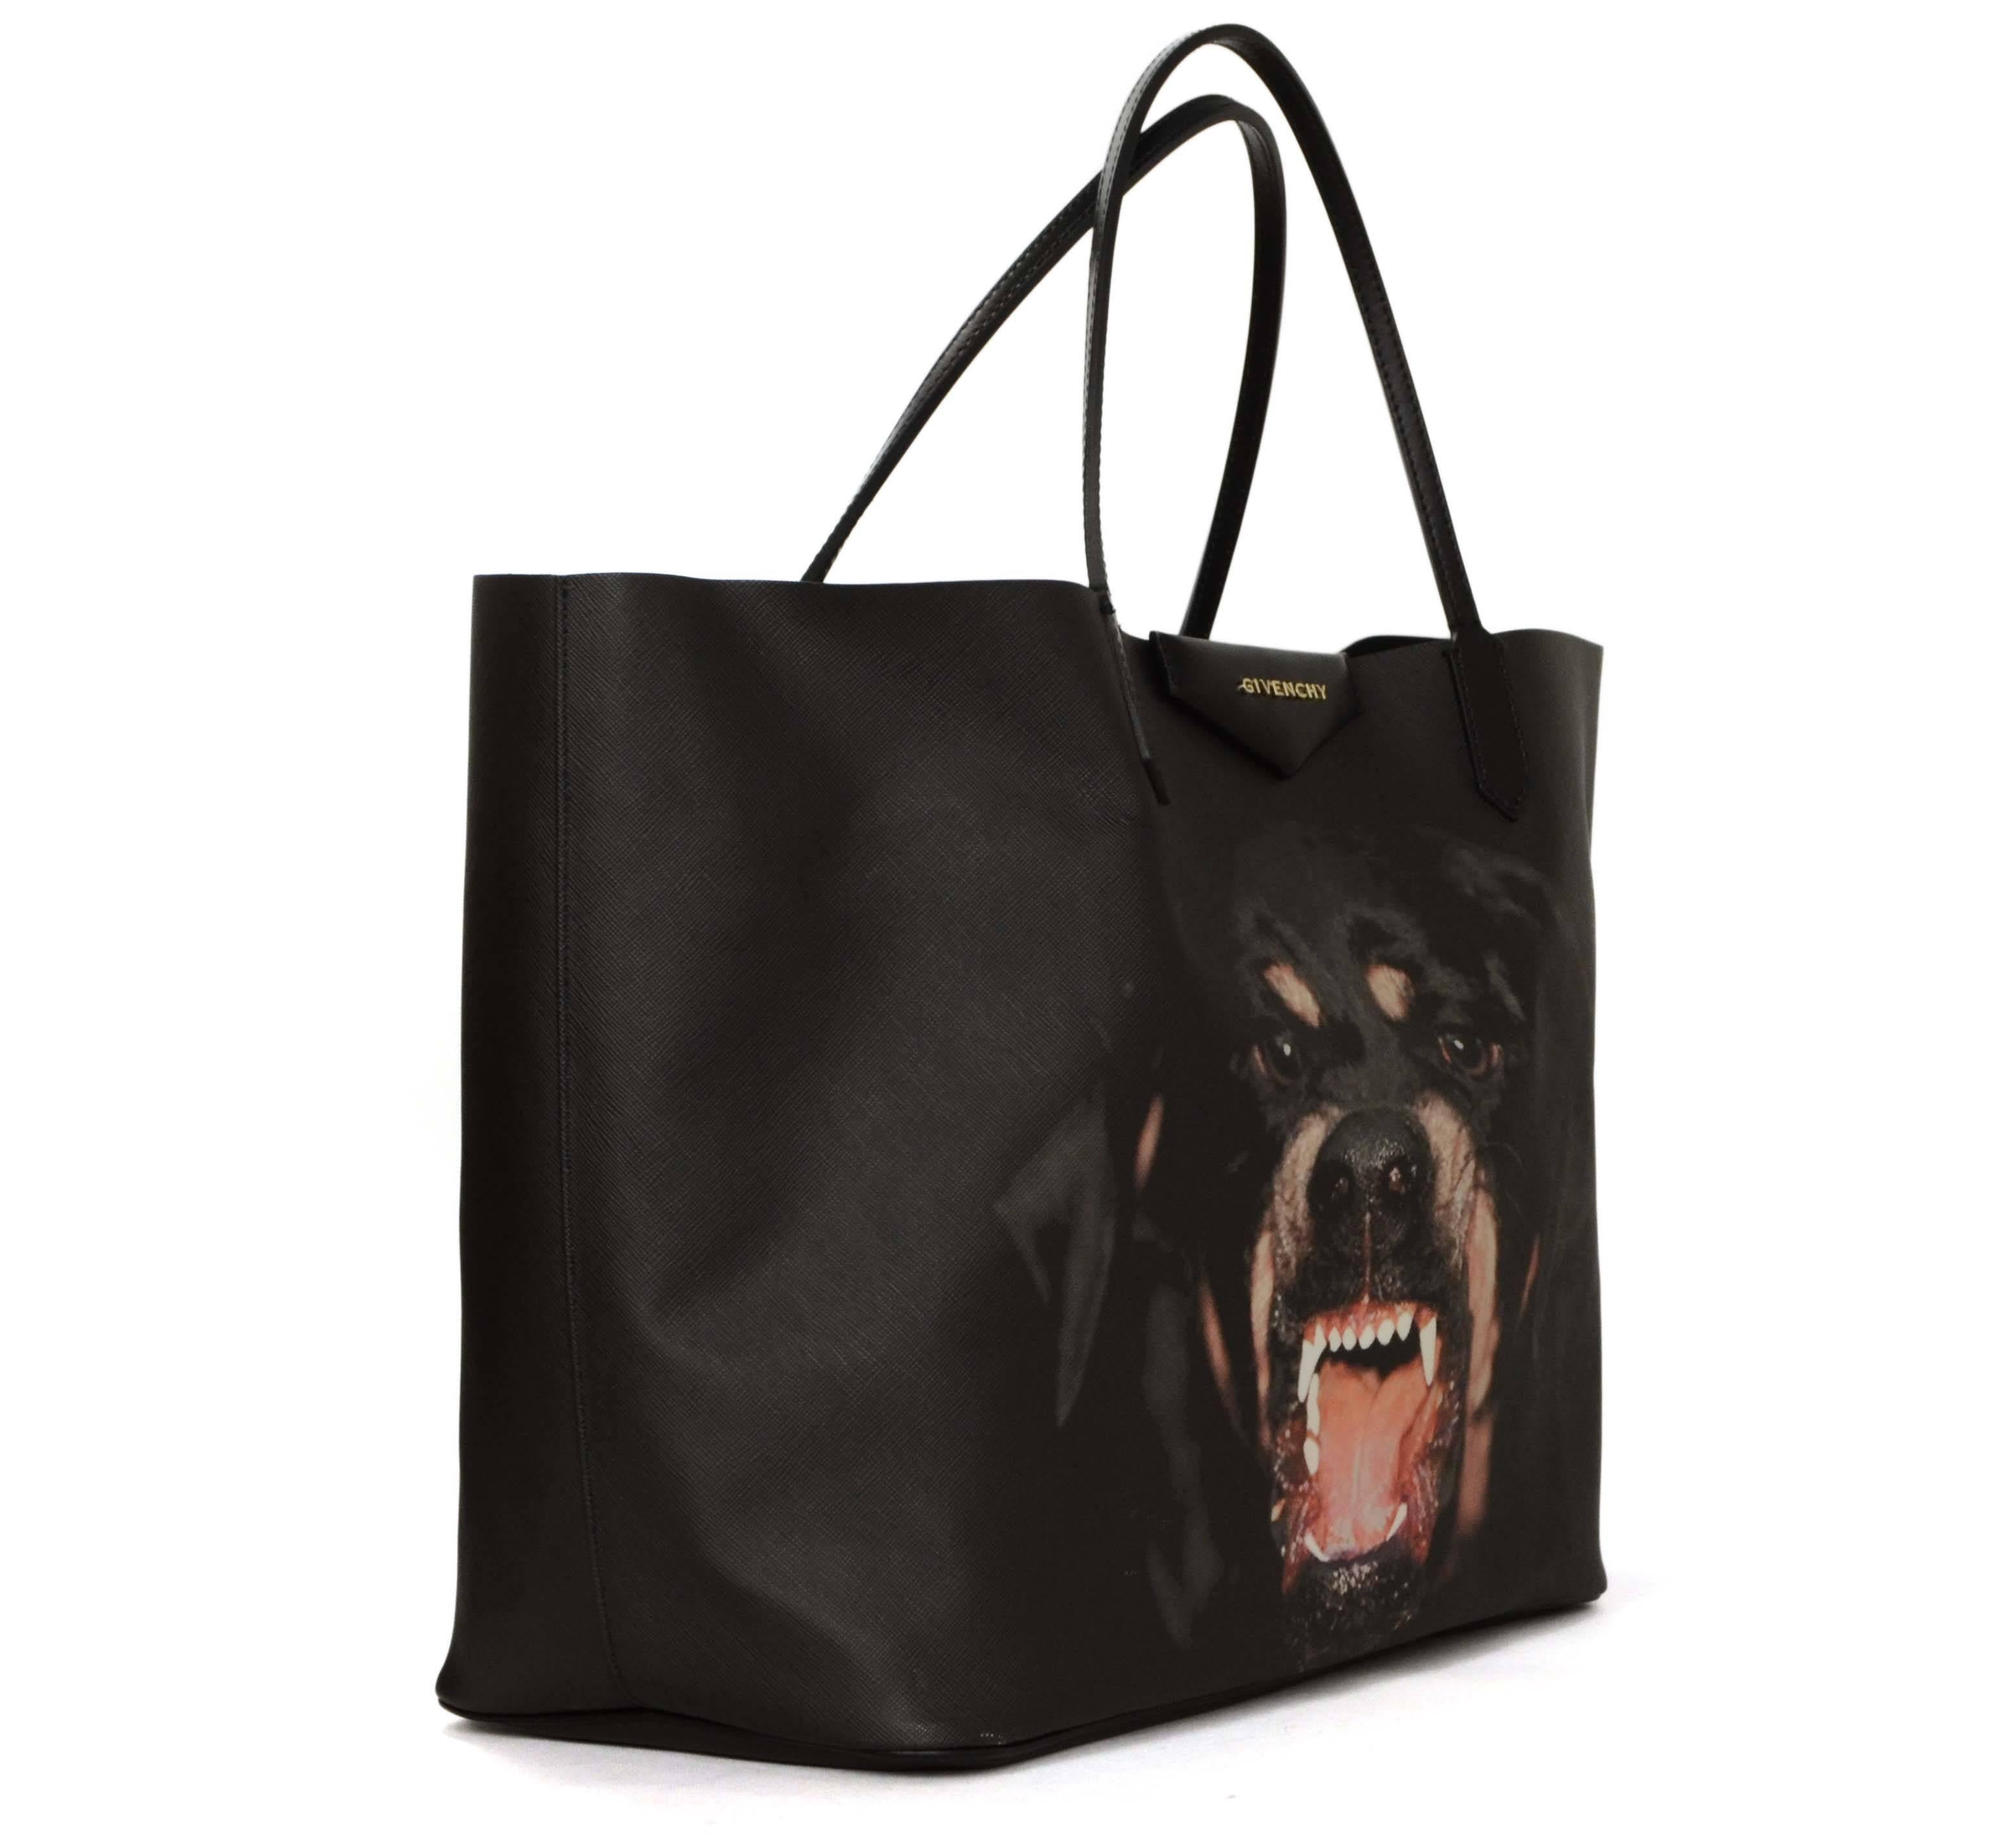 Features Givenchy's sold out rottweiler print

Made In: Hungary
Color: Black
Hardware: Goldtone
Materials: Black PVC with leather trim
Lining: Black cotton
Closure/Opening: Open
Exterior Pockets: None
Interior Pockets: None- comes with a